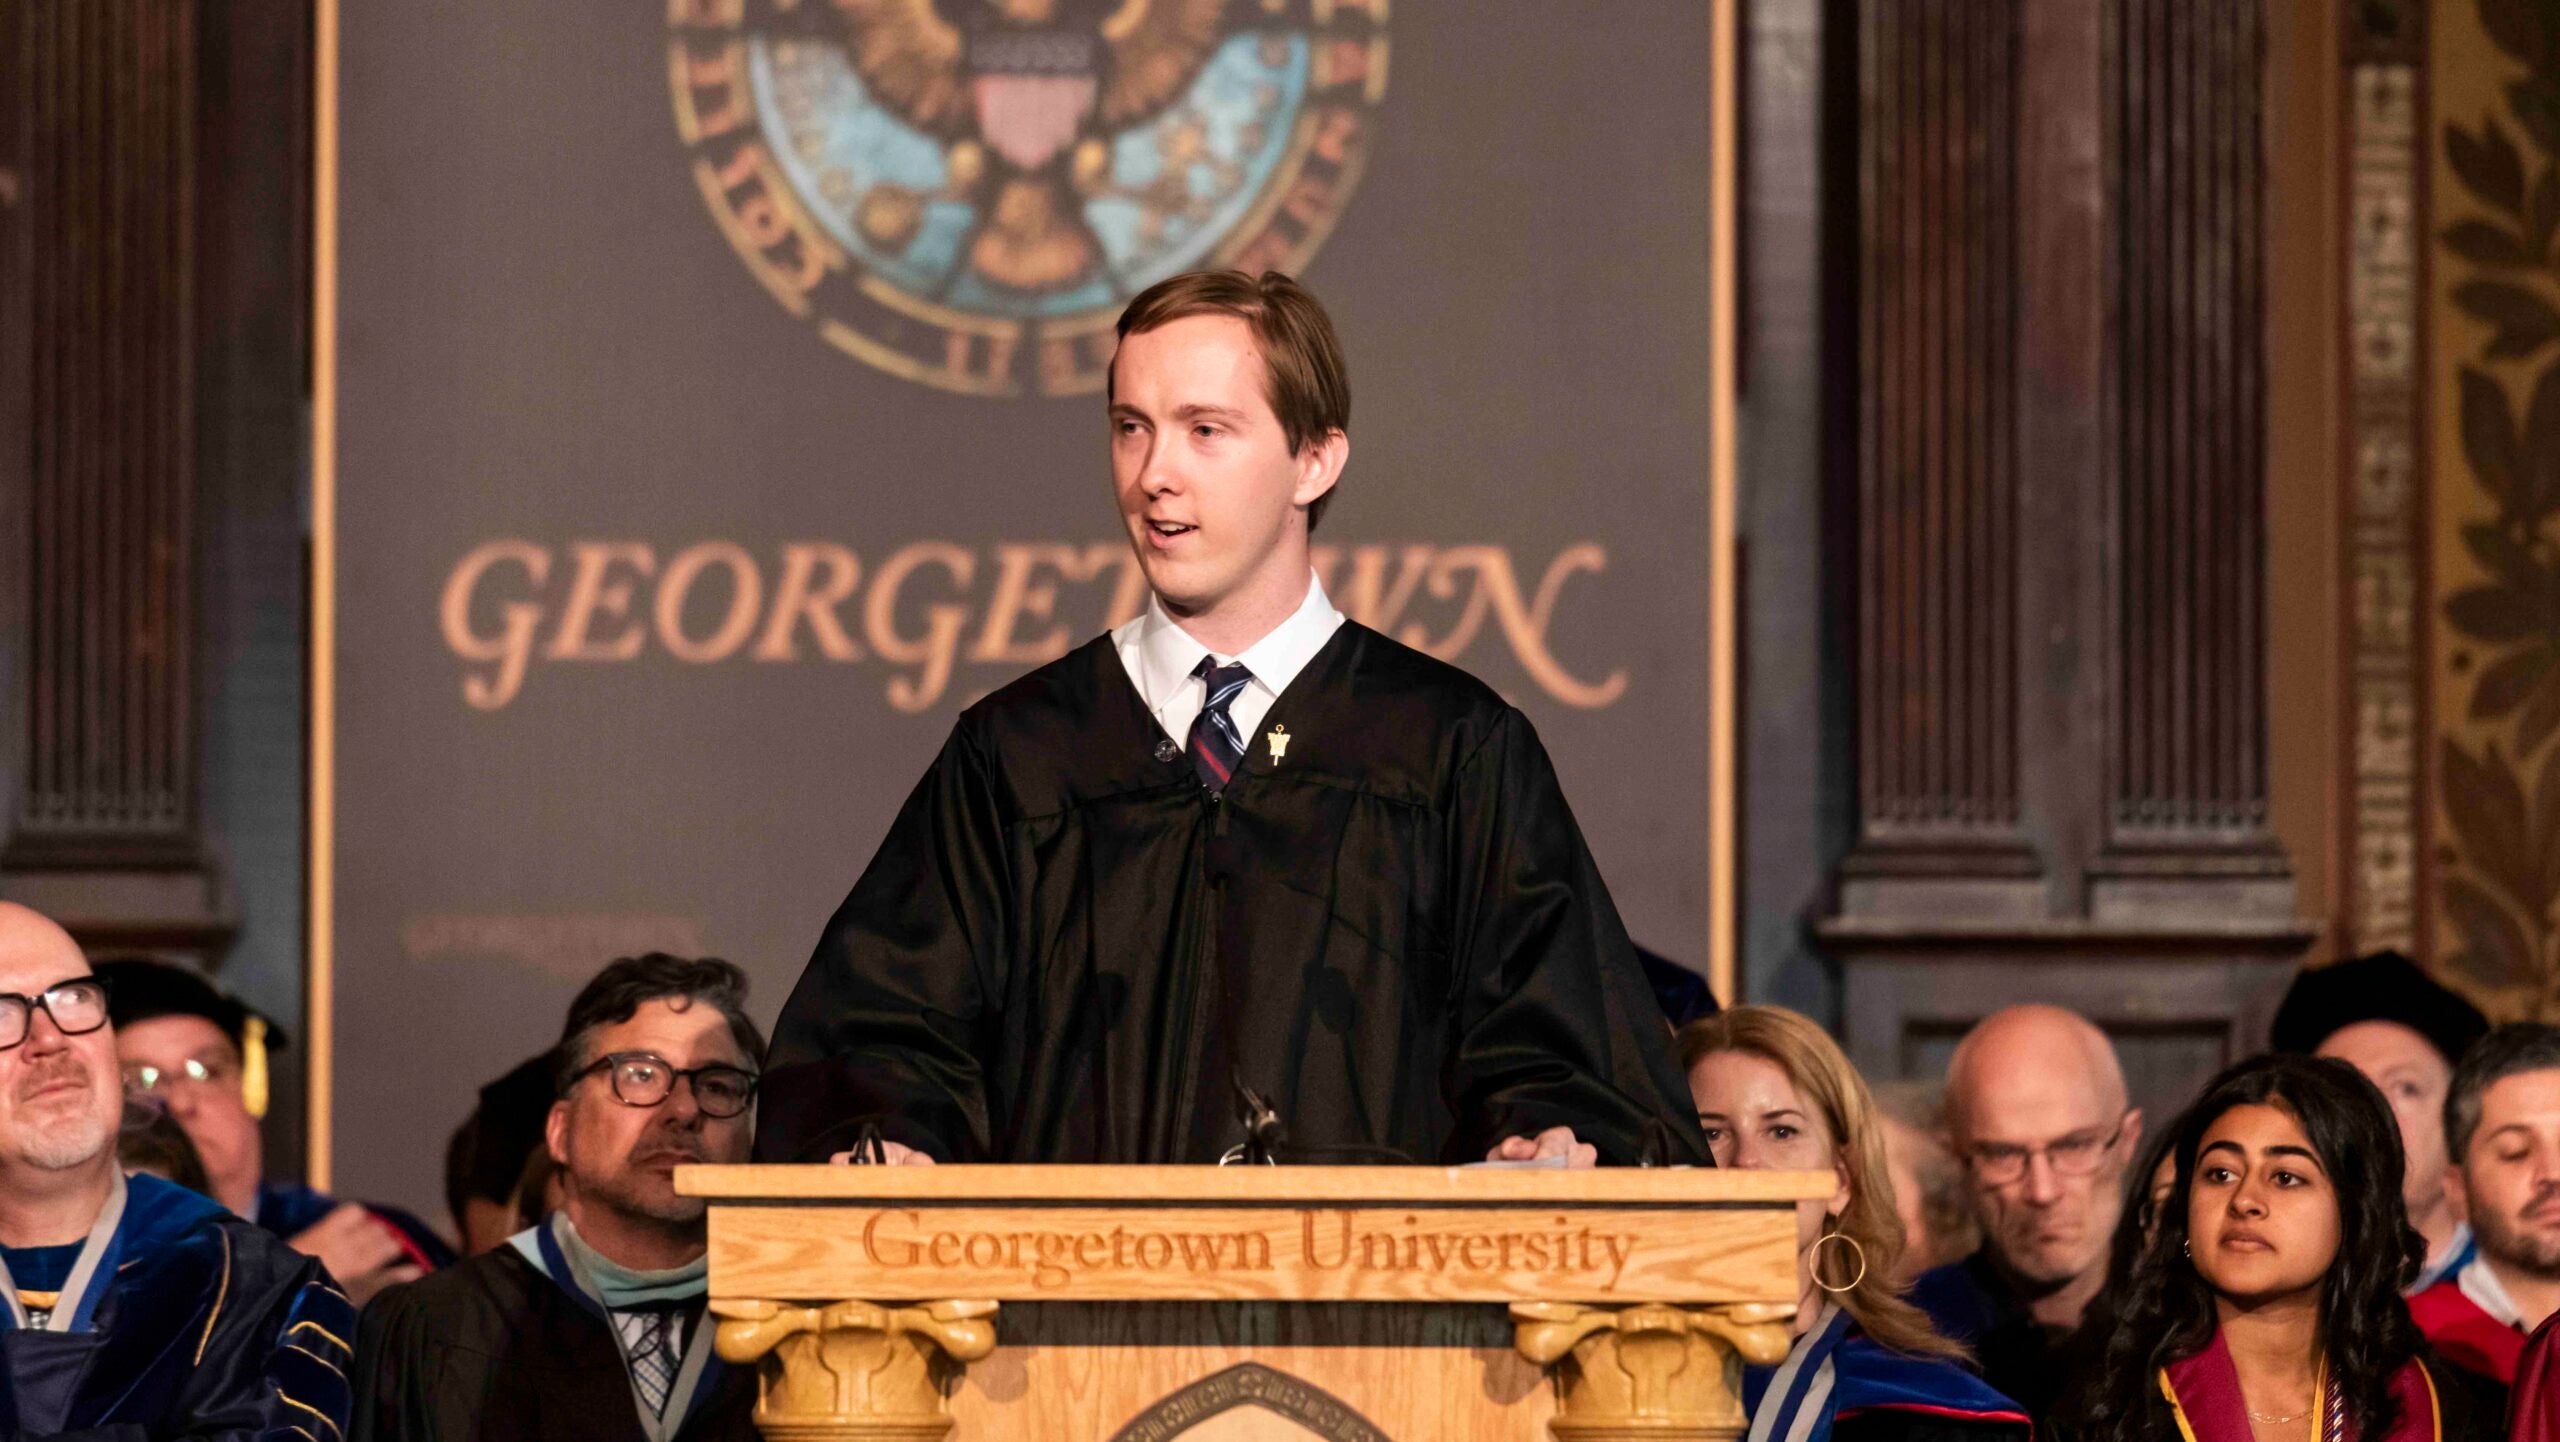 A young man in academic regalia speaks at a podium. He wears a shirt with a white collar and a tie. His hair is combed.